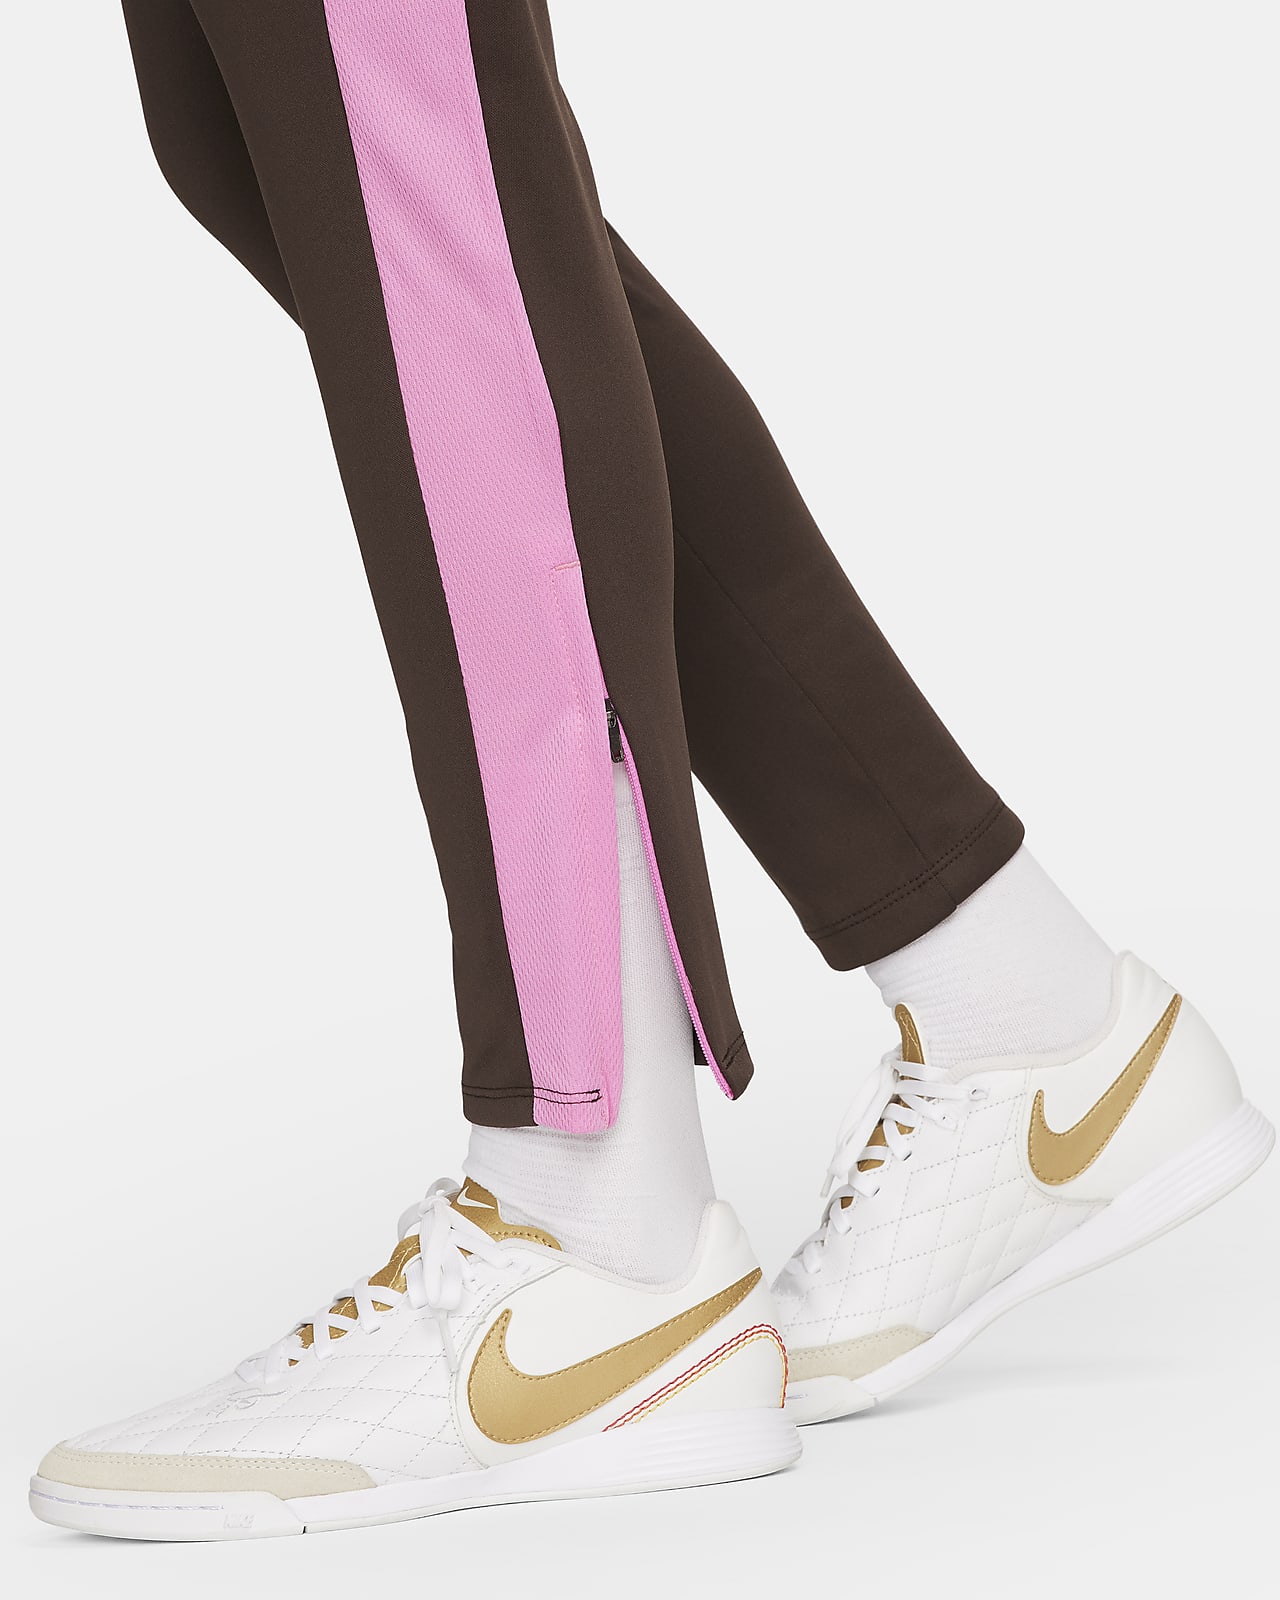 NIKE Women's Light Dri-Fit Athletic Pants Black and Pink Size M (8-10)  Cropped